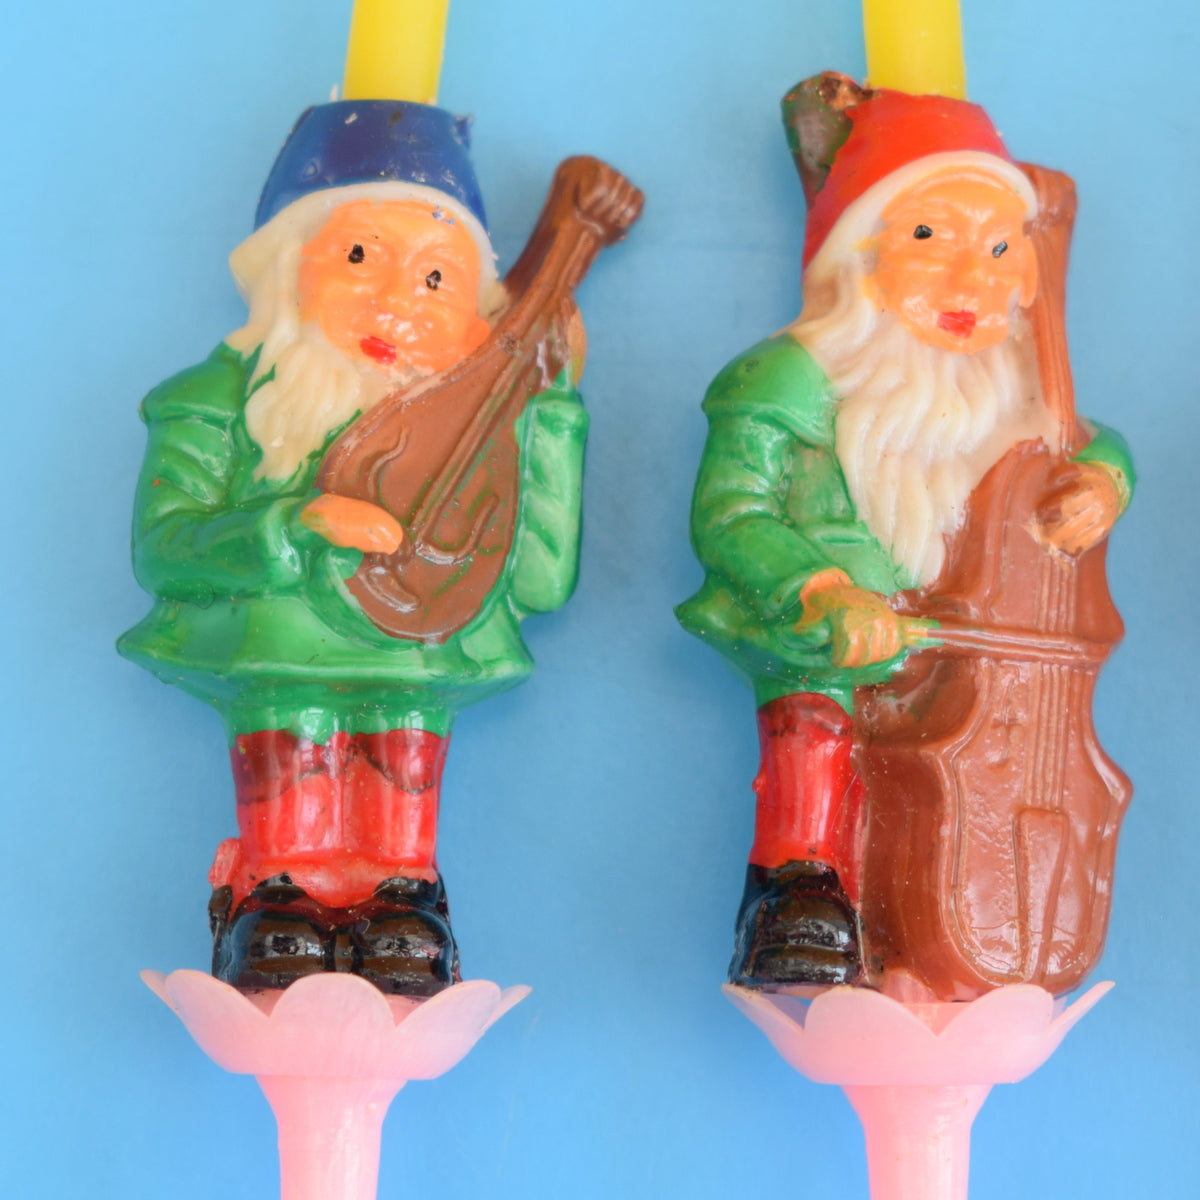 Vintage 1960s Plastic Cake Candle Holders - Gnome / Train